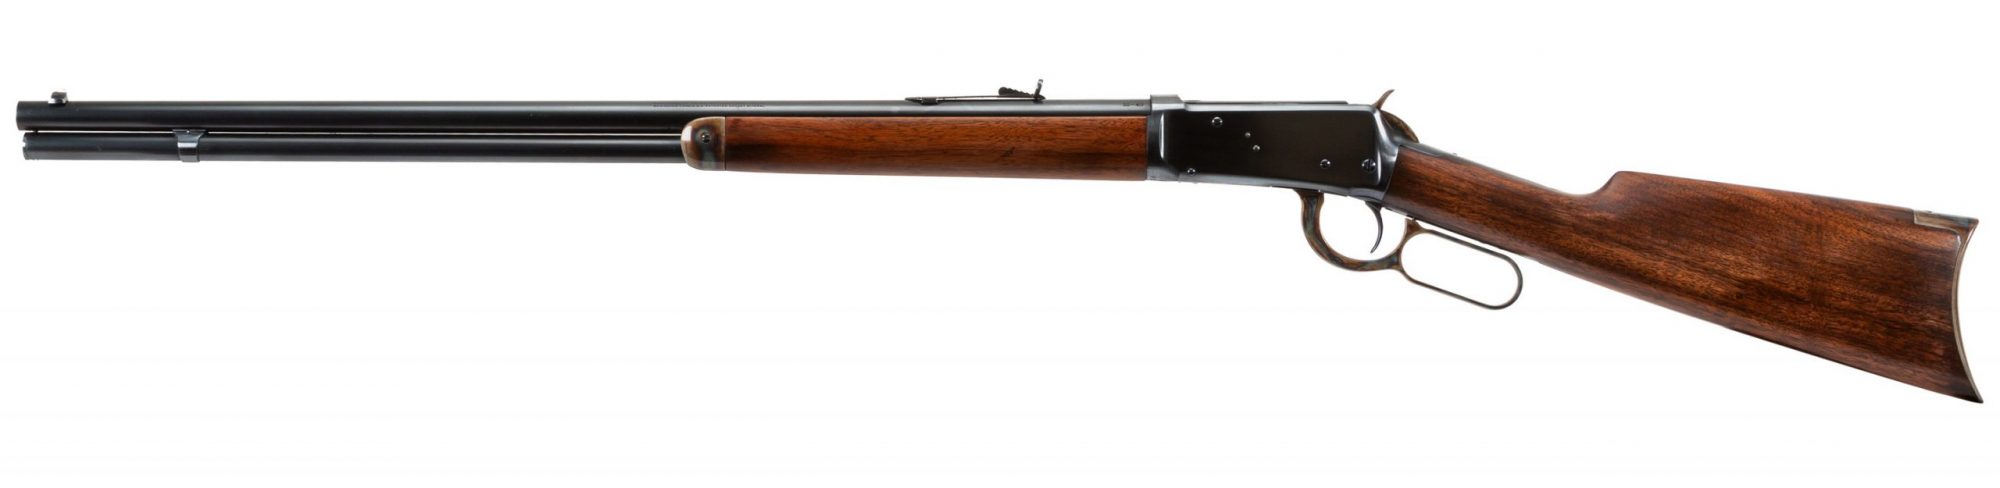 Photo of a Winchester Model 1894 from 1909, featuring color case hardening and charcoal bluing by Turnbull Restoration